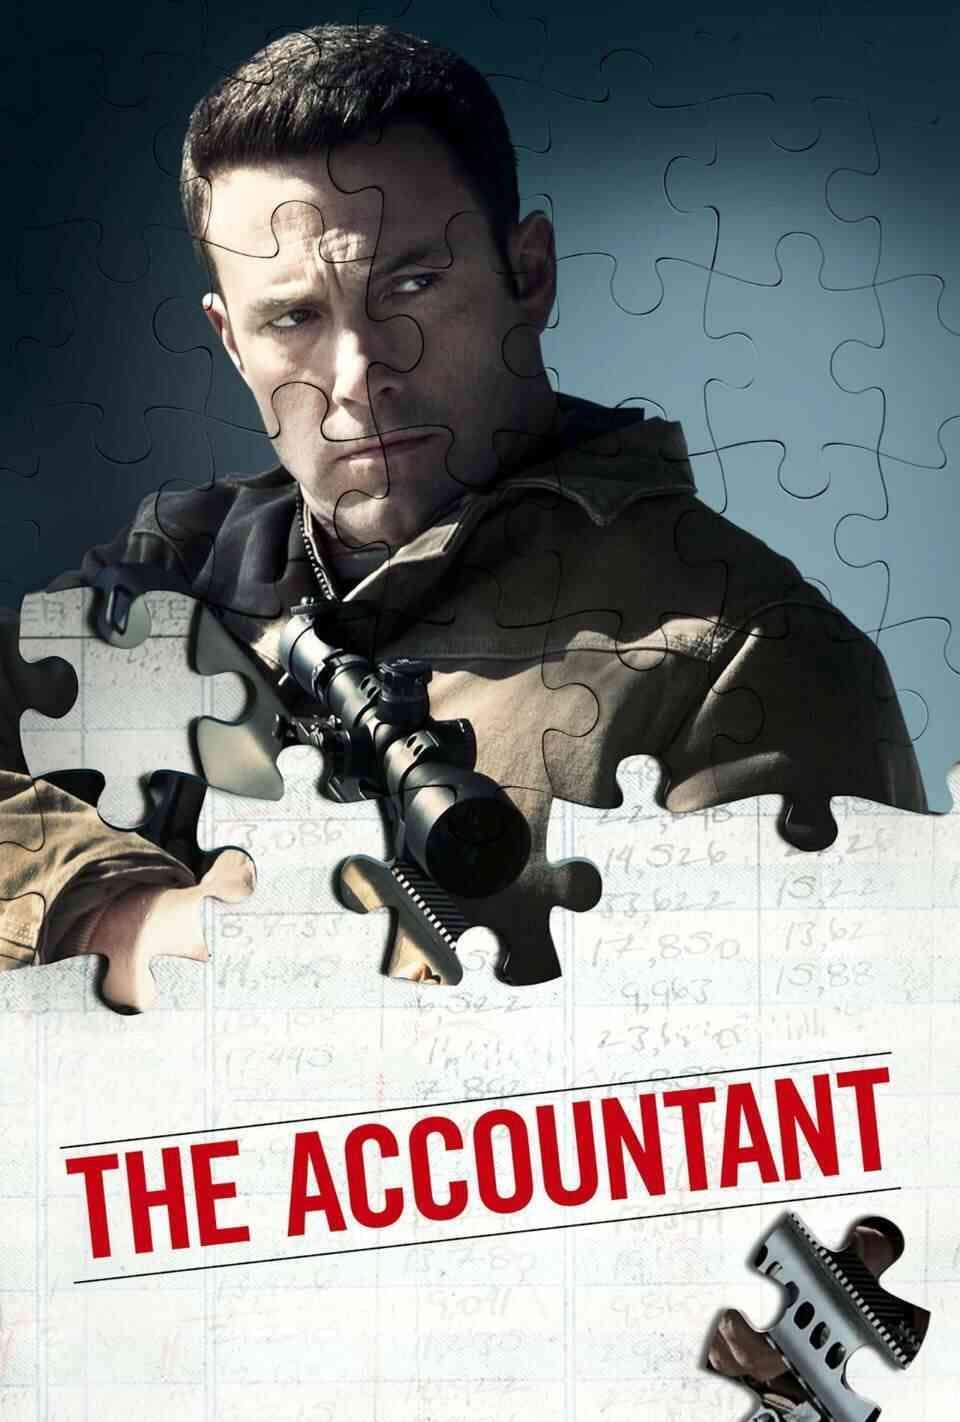 Read The Accountant screenplay (poster)